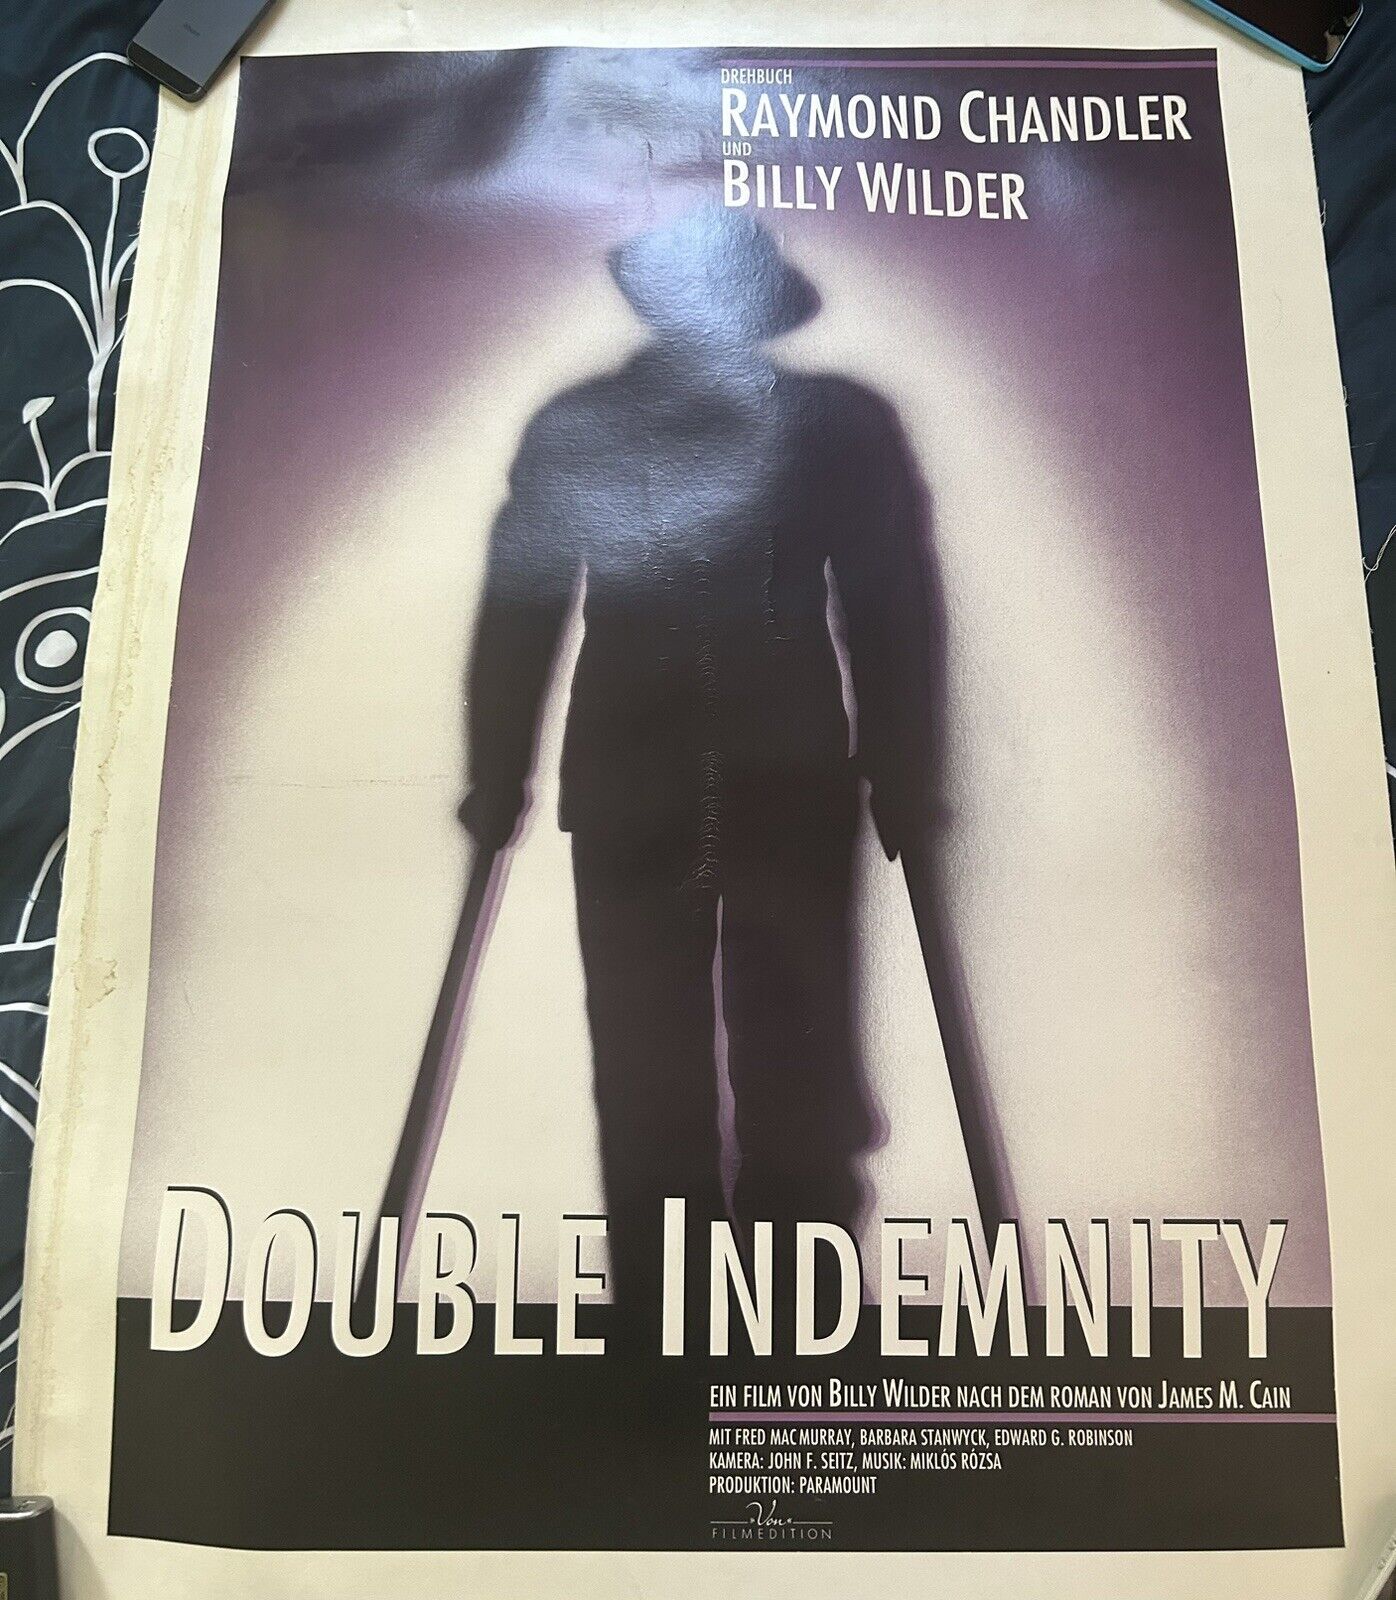 REDUCED: Double Indemnity (1944) Stunning German Rerelease Poster. Linen Backed.